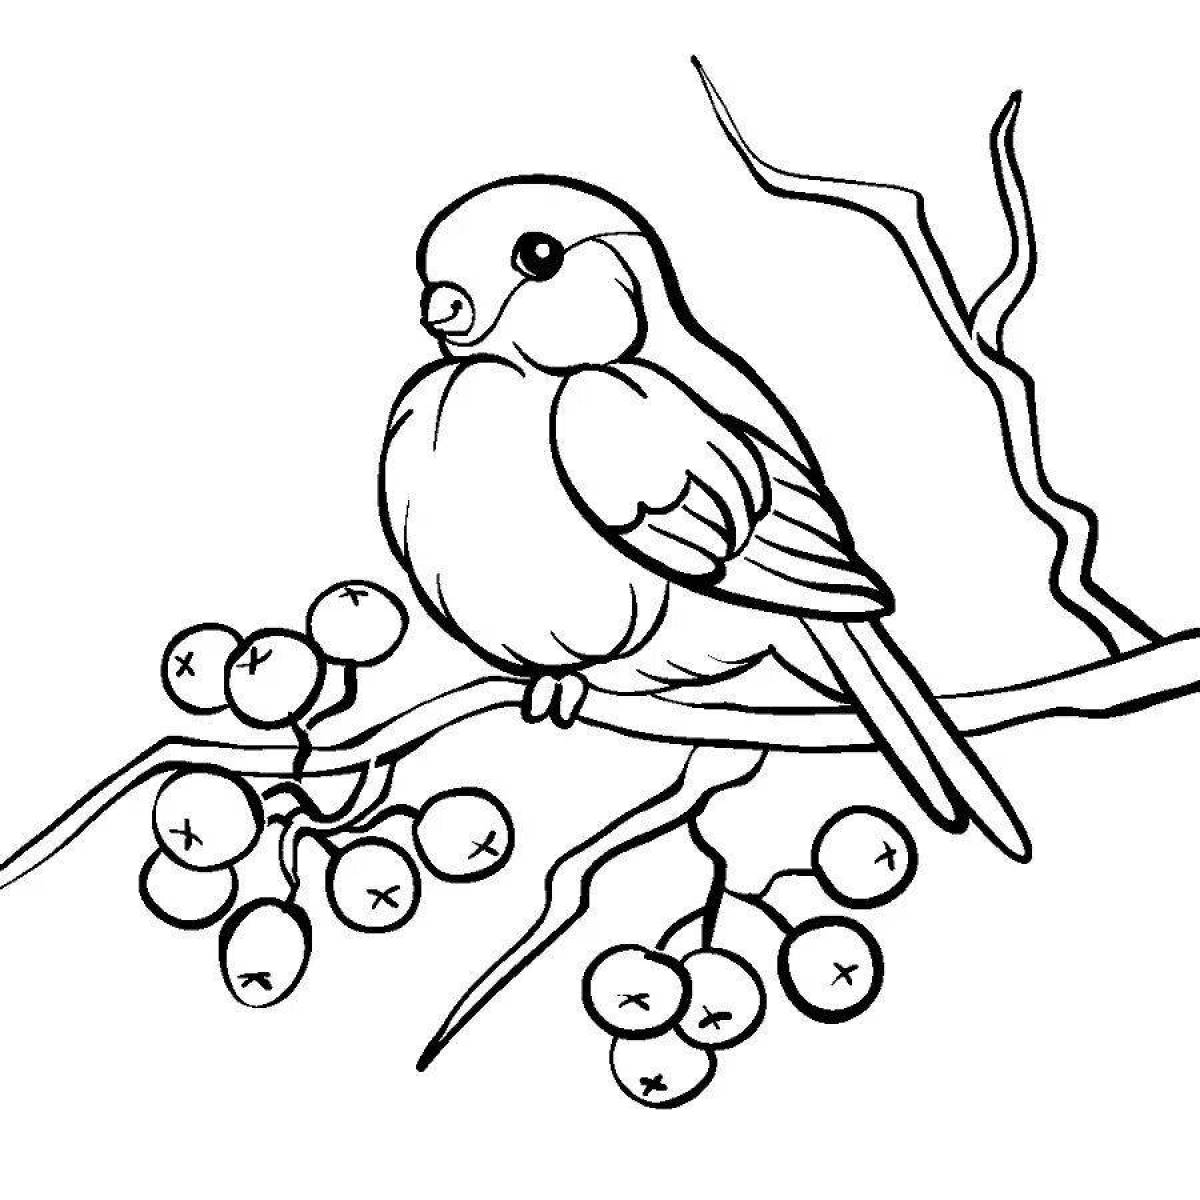 Adorable tit coloring page